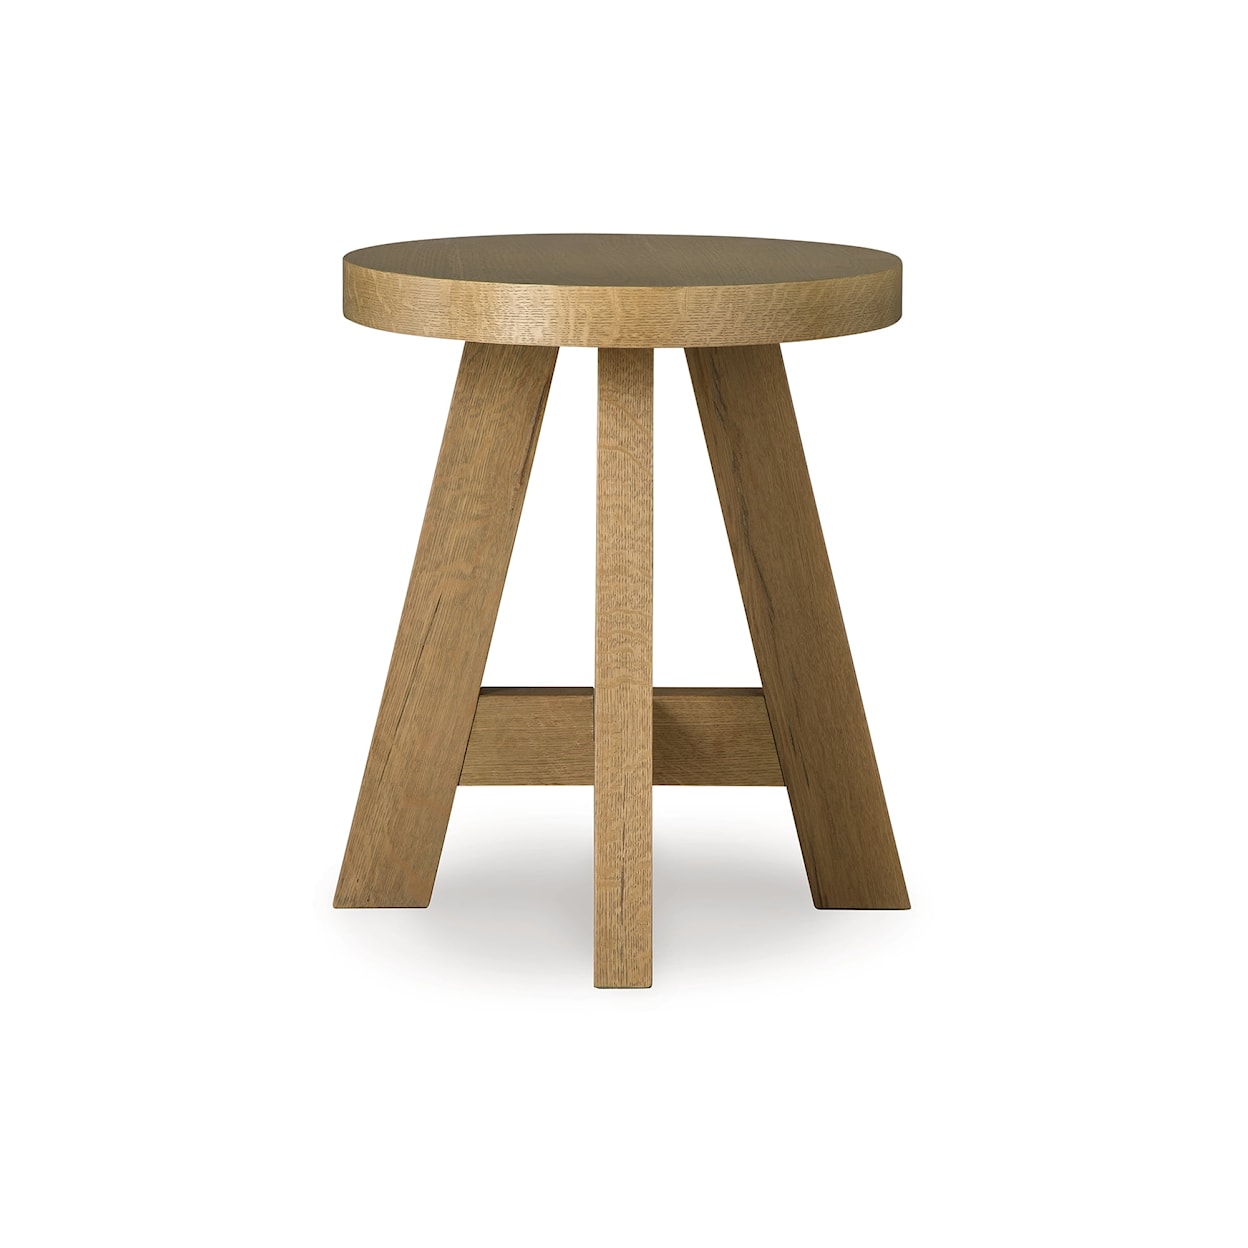 Benchcraft Brinstead Oval End Table